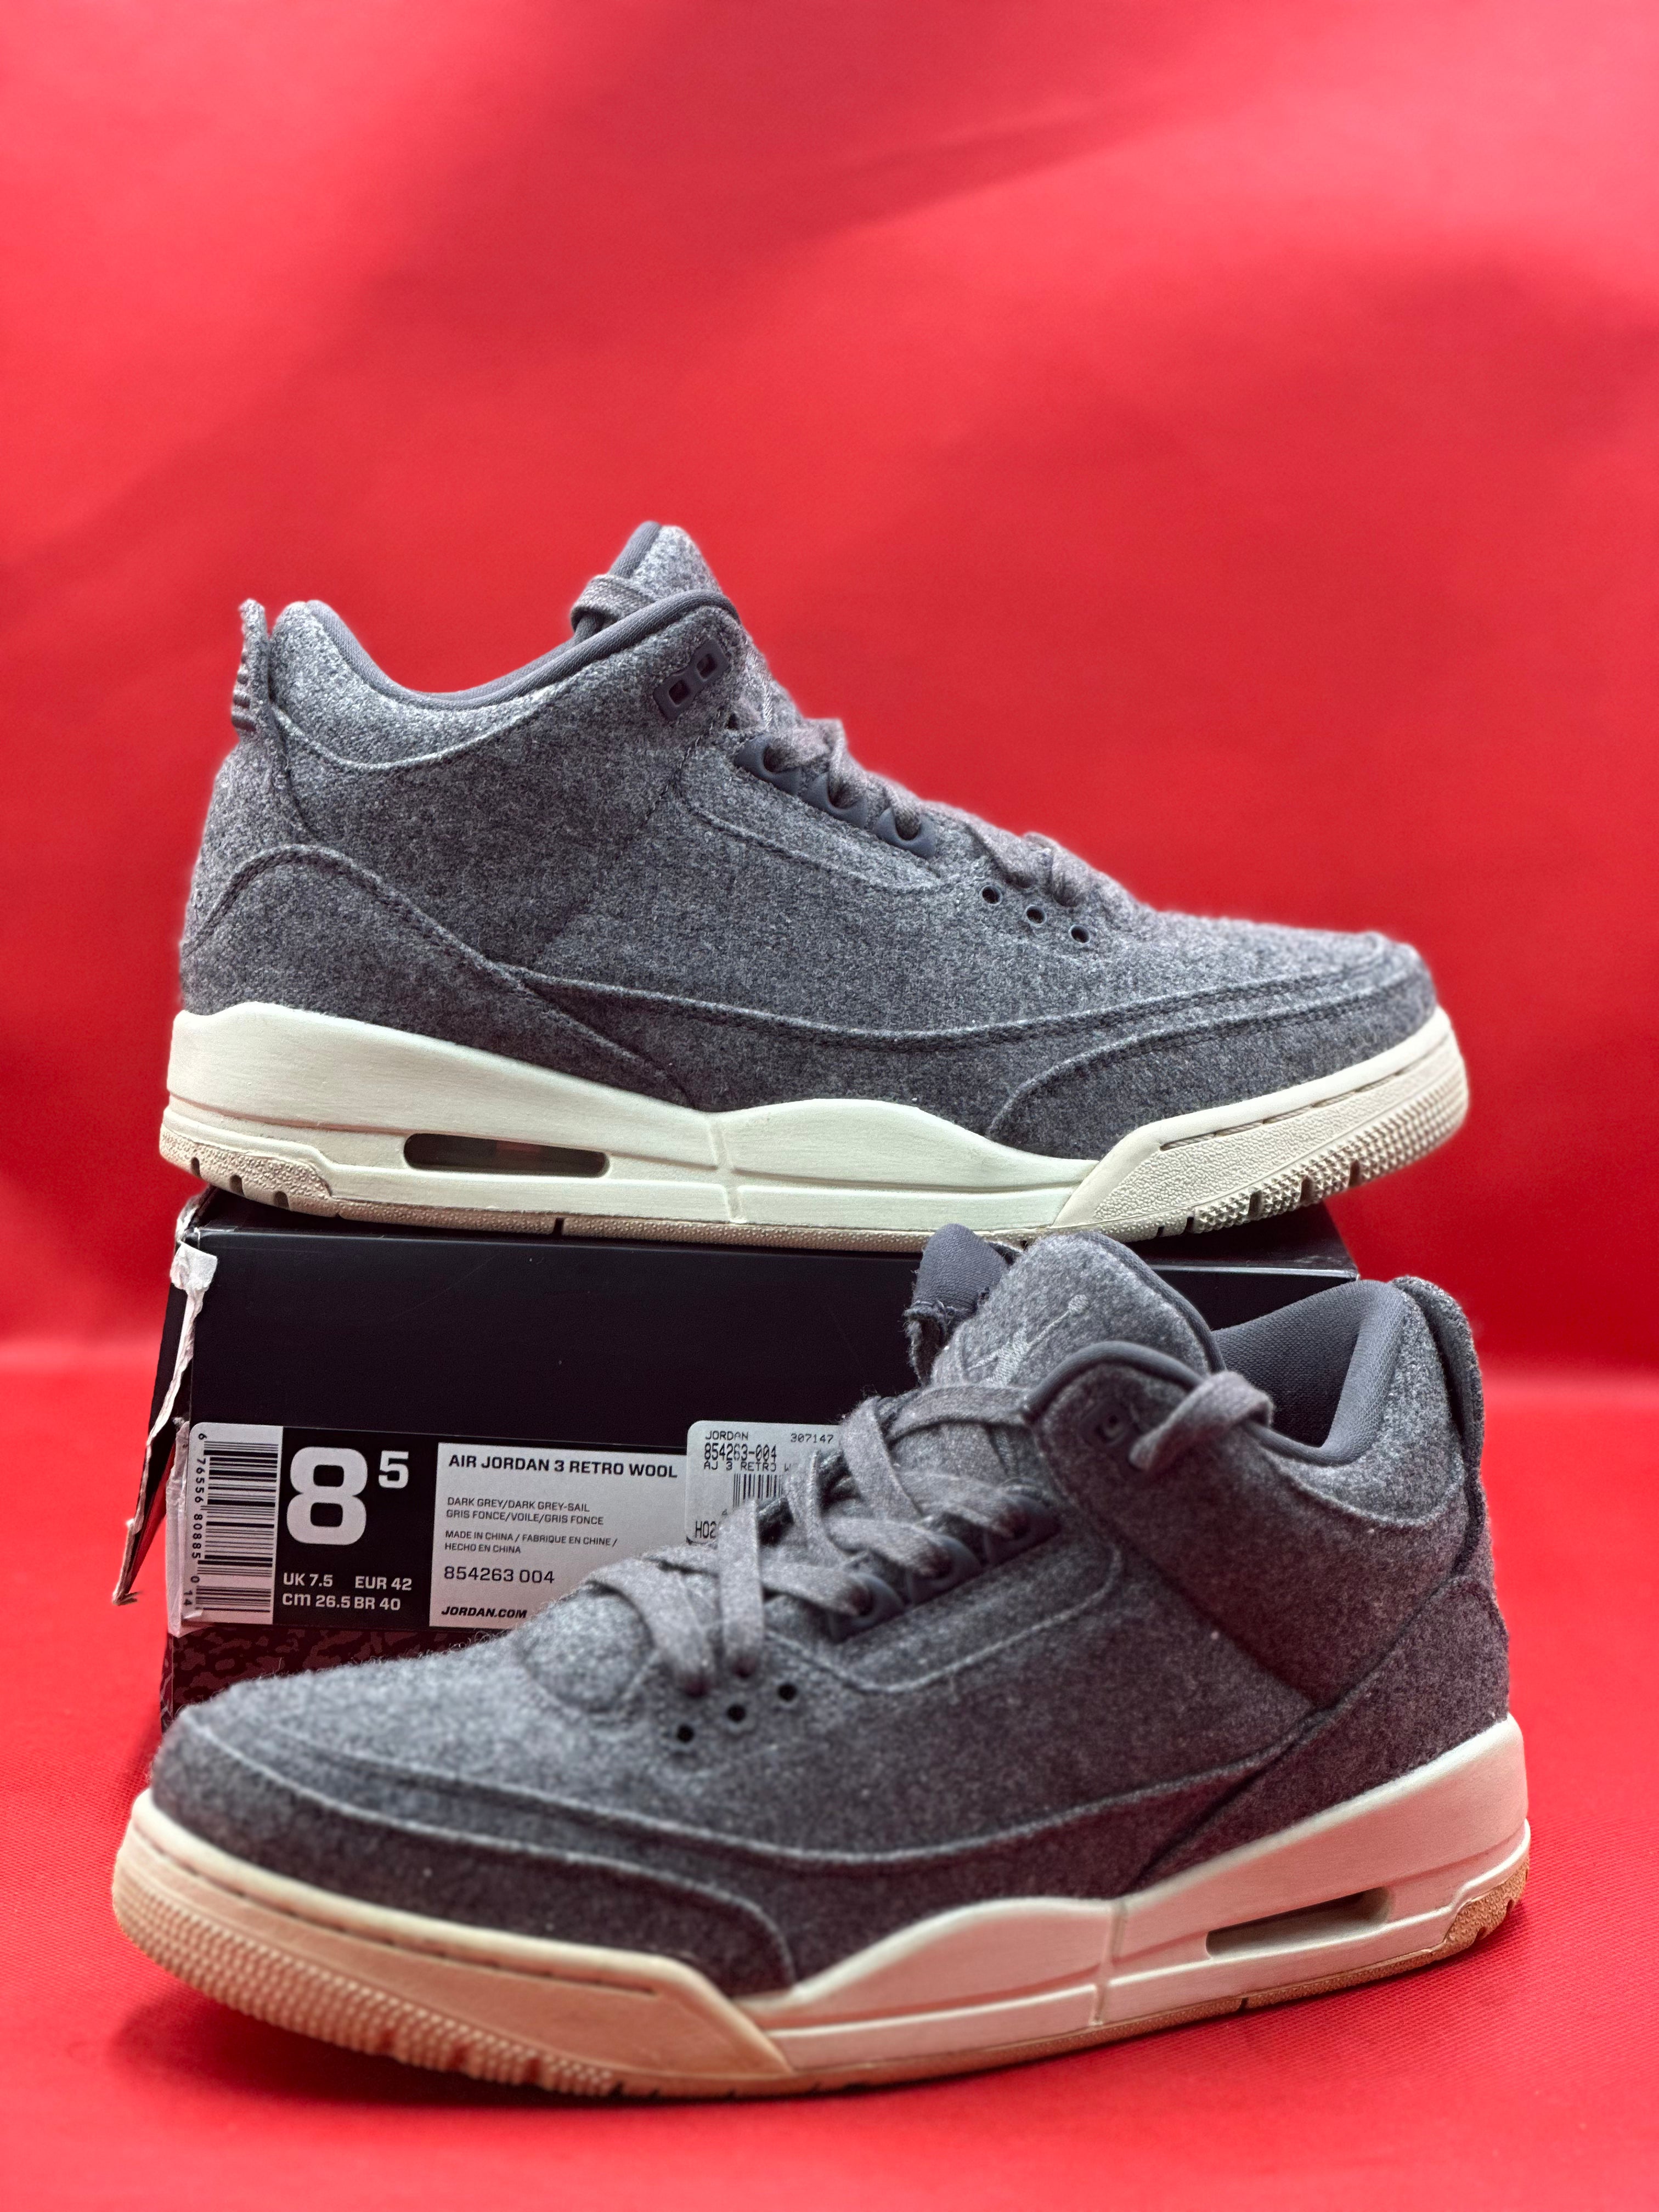 Wool 3s size 8.5